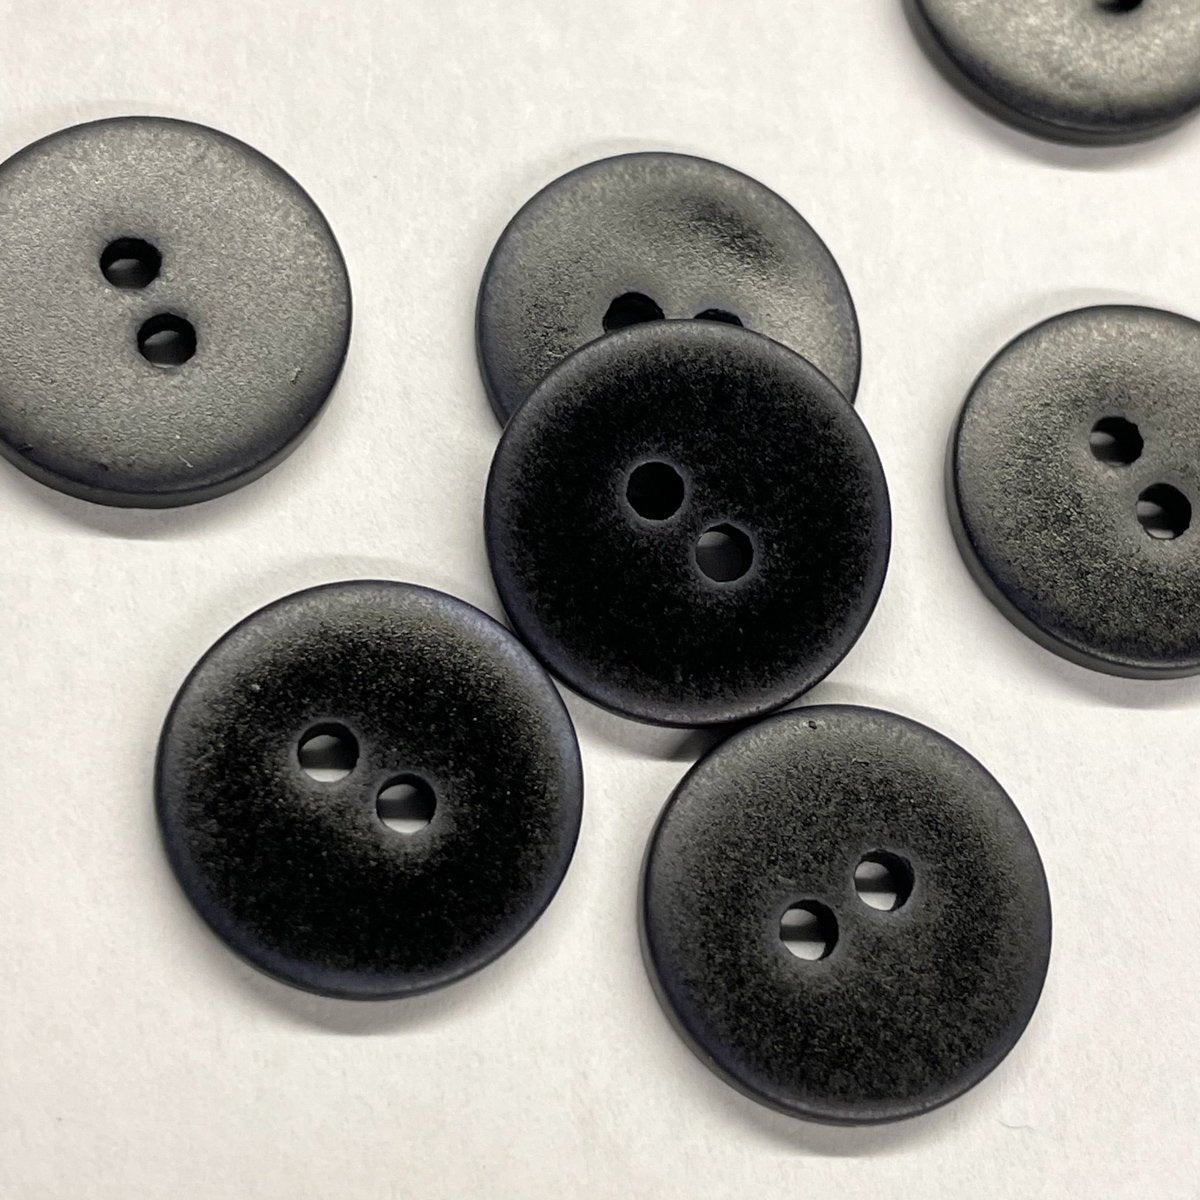 Black 2-Hole Buttons, Glossy - Tiny, 5/16 (Pkgs of 12)